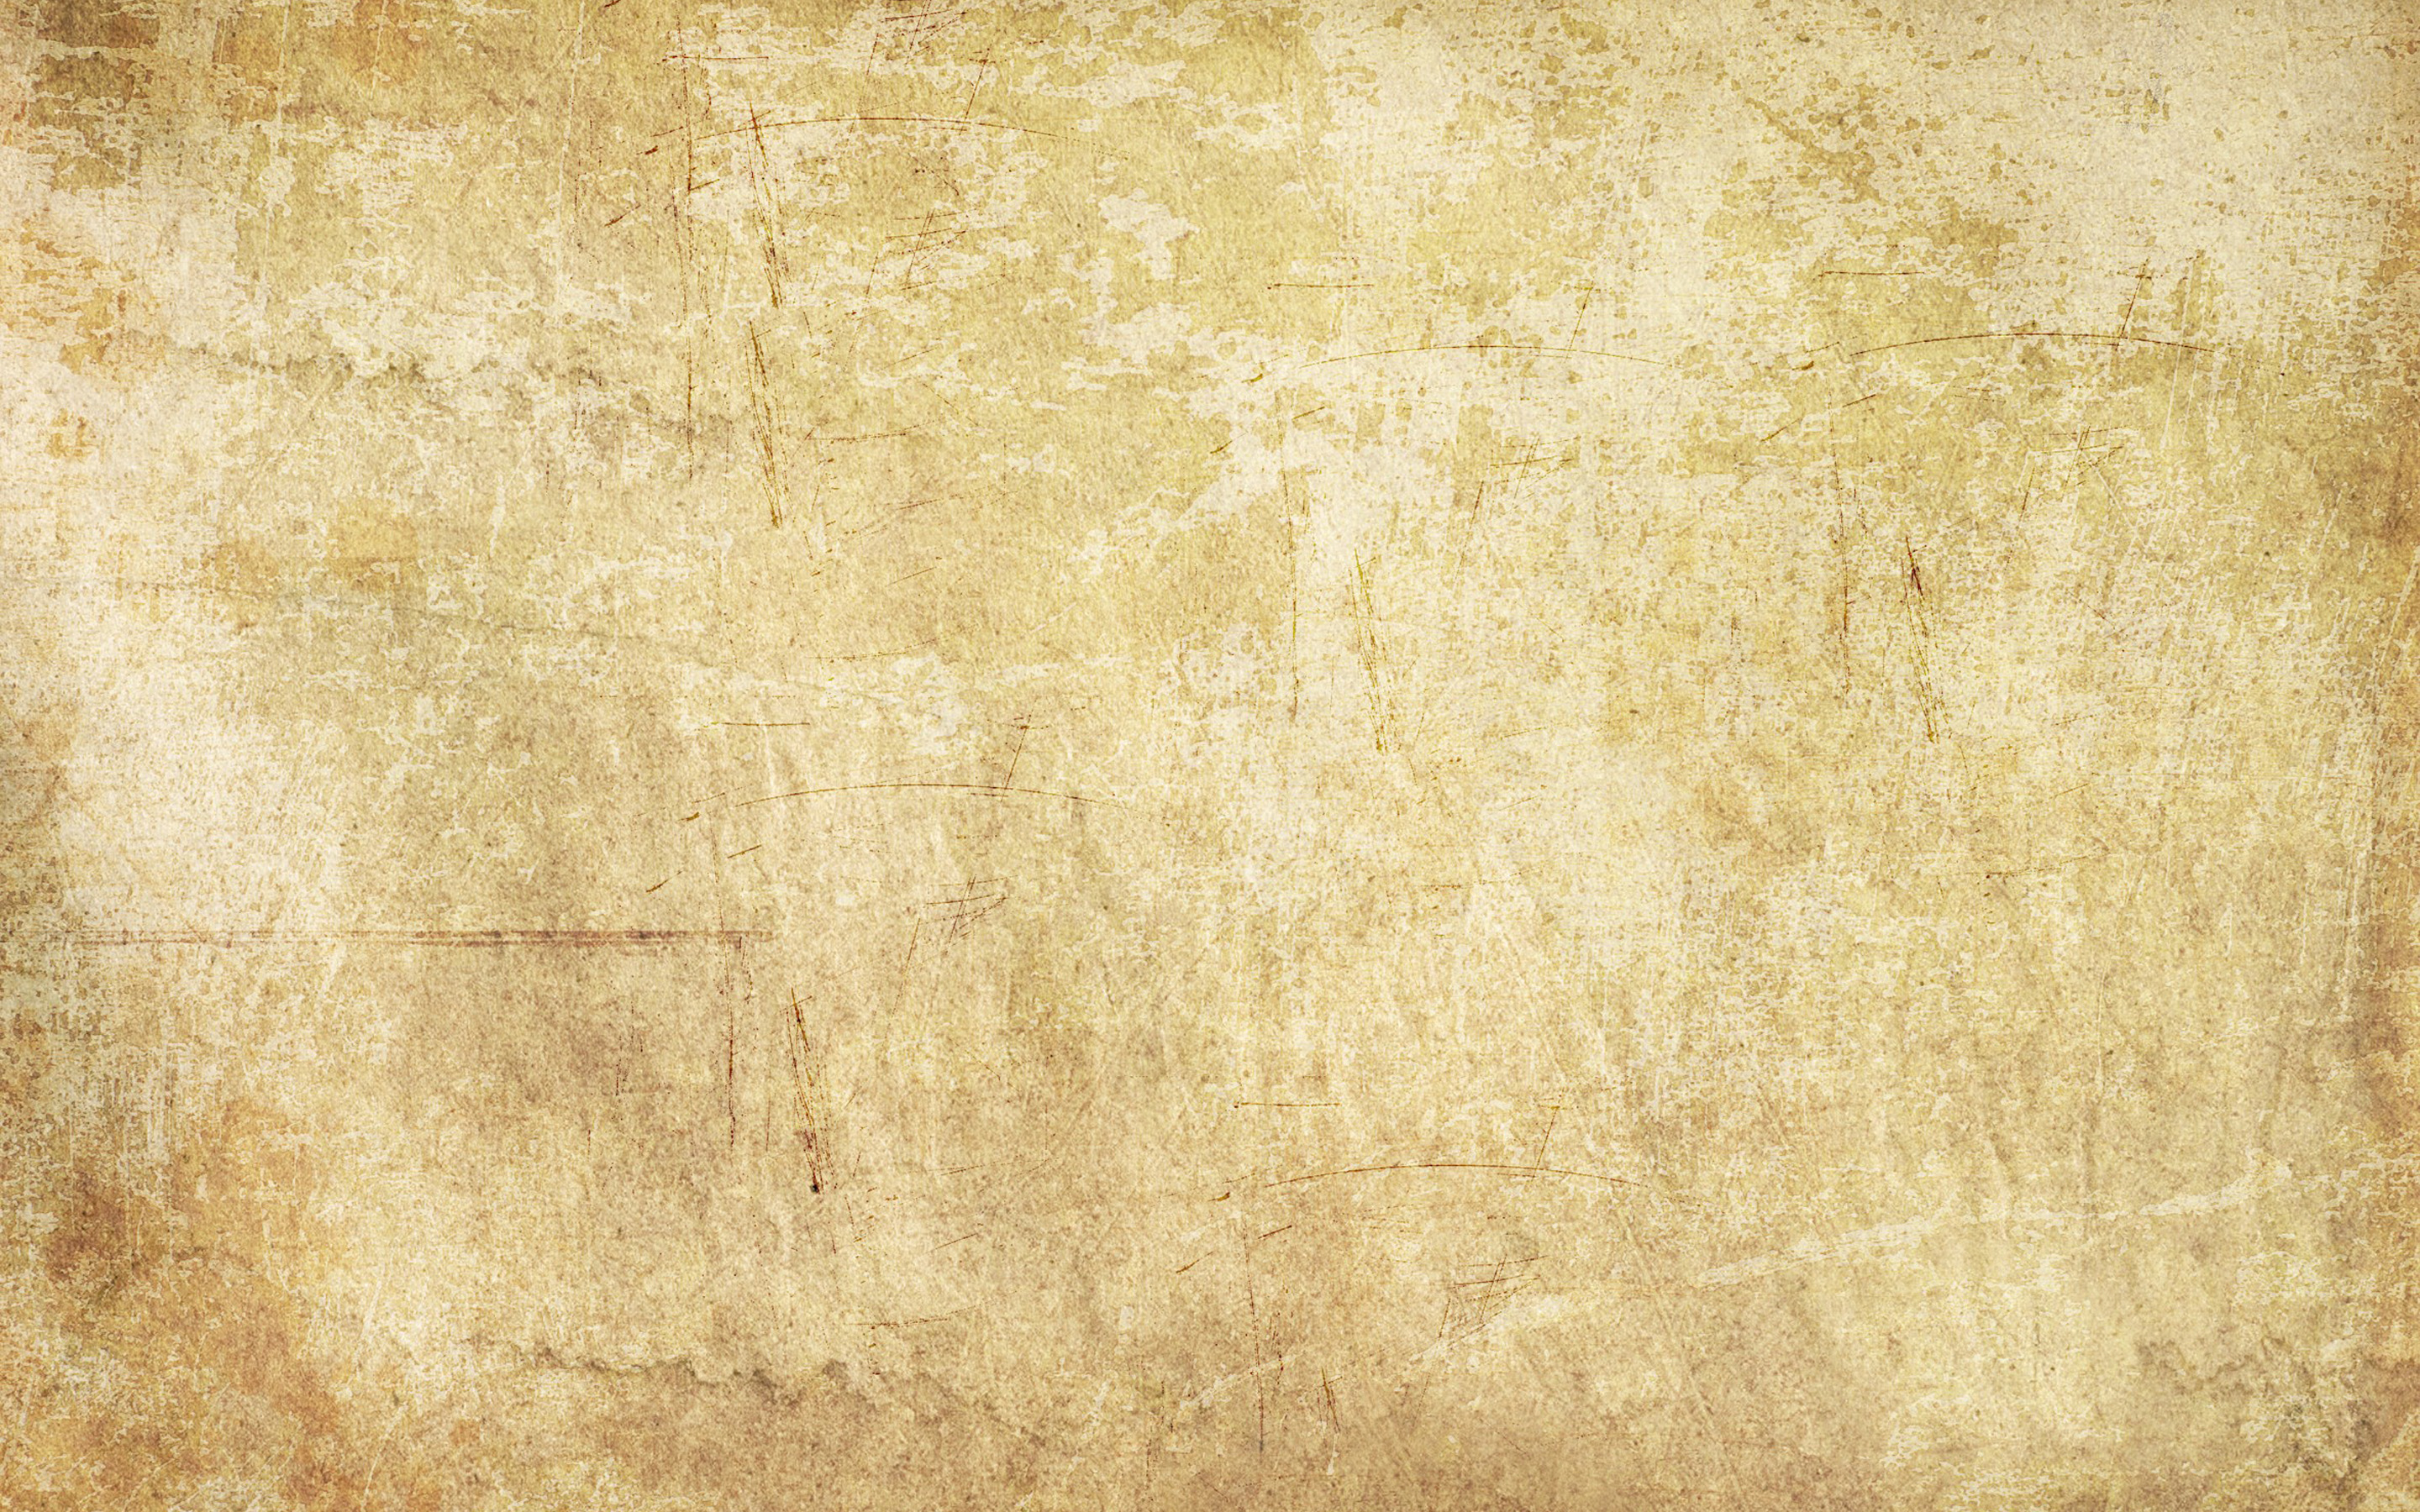 Download wallpapers old paper texture, paper patterns, retro backgrounds, brown  paper background, paper backgrounds, paper textures, old paper, brown paper  for desktop with resolution 2880x1800. High Quality HD pictures wallpapers